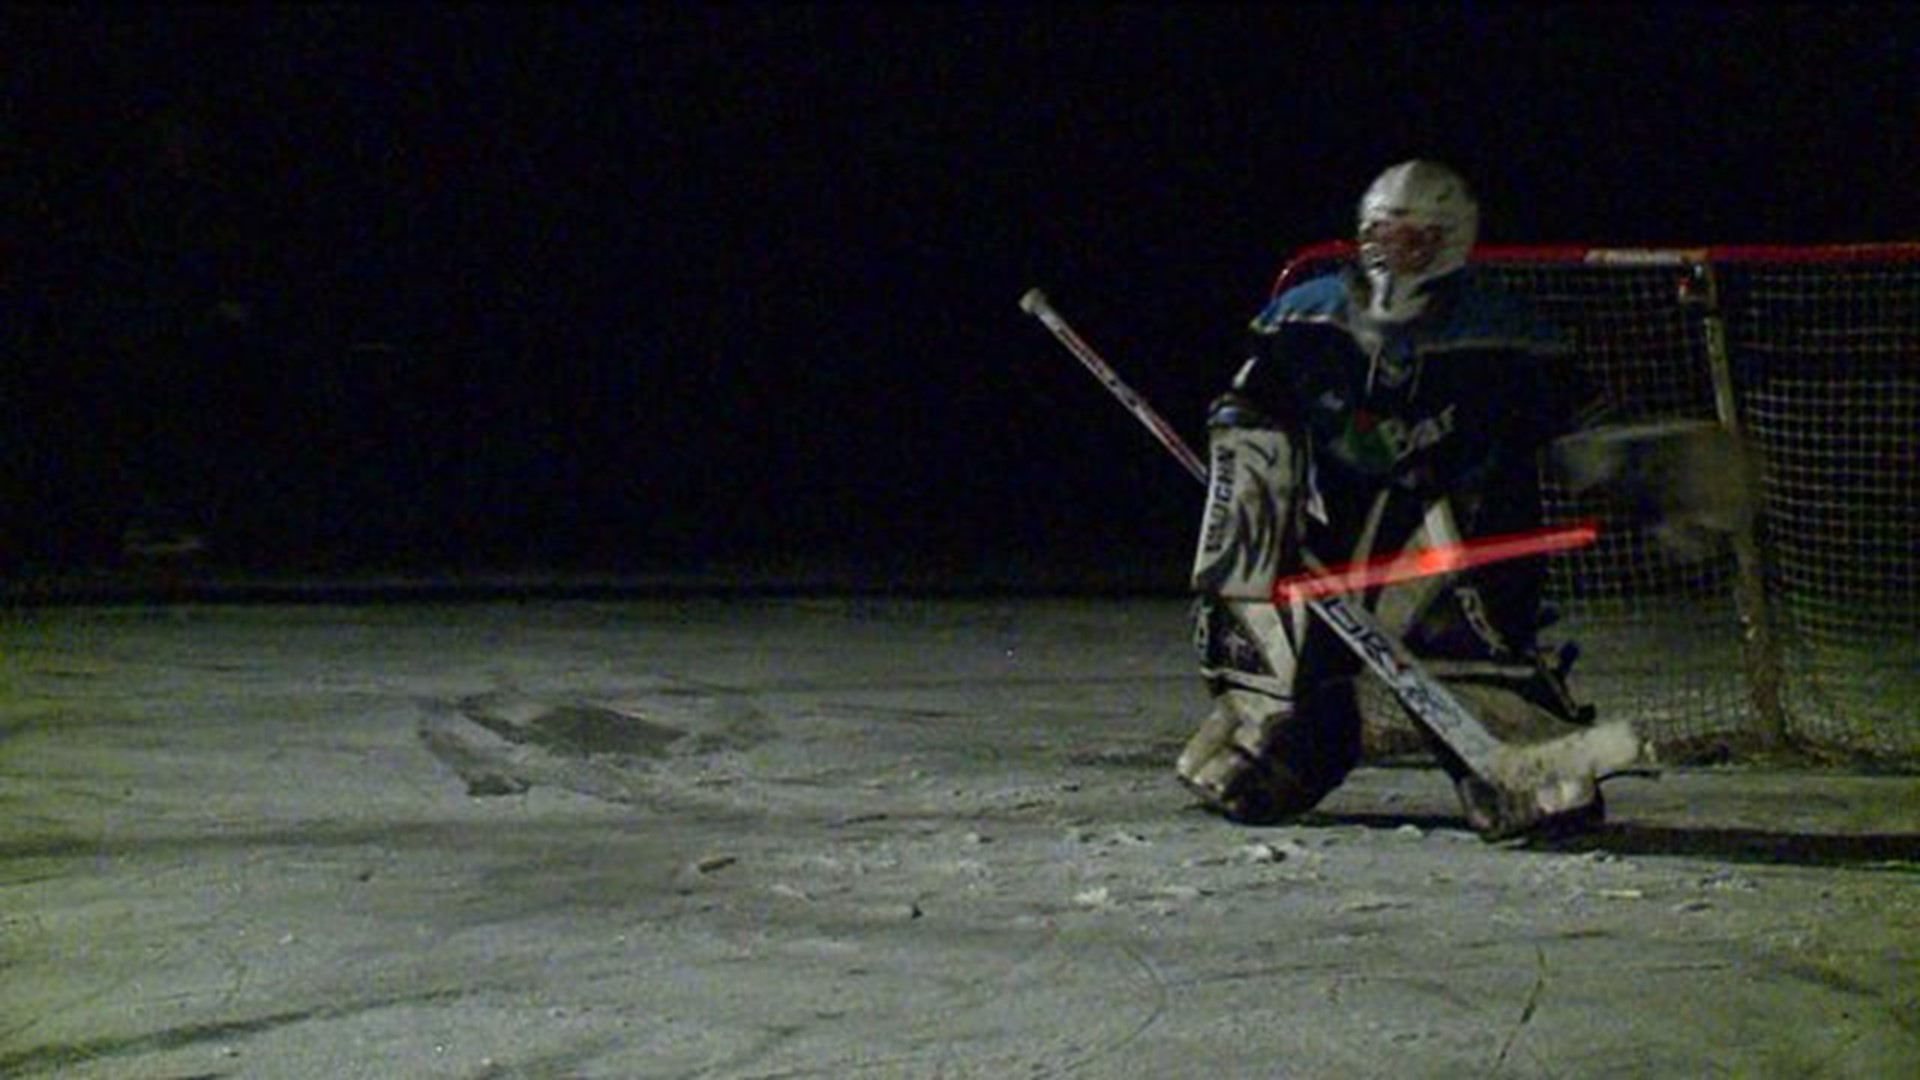 Night hockey takes on a whole new meaning with light-up pucks